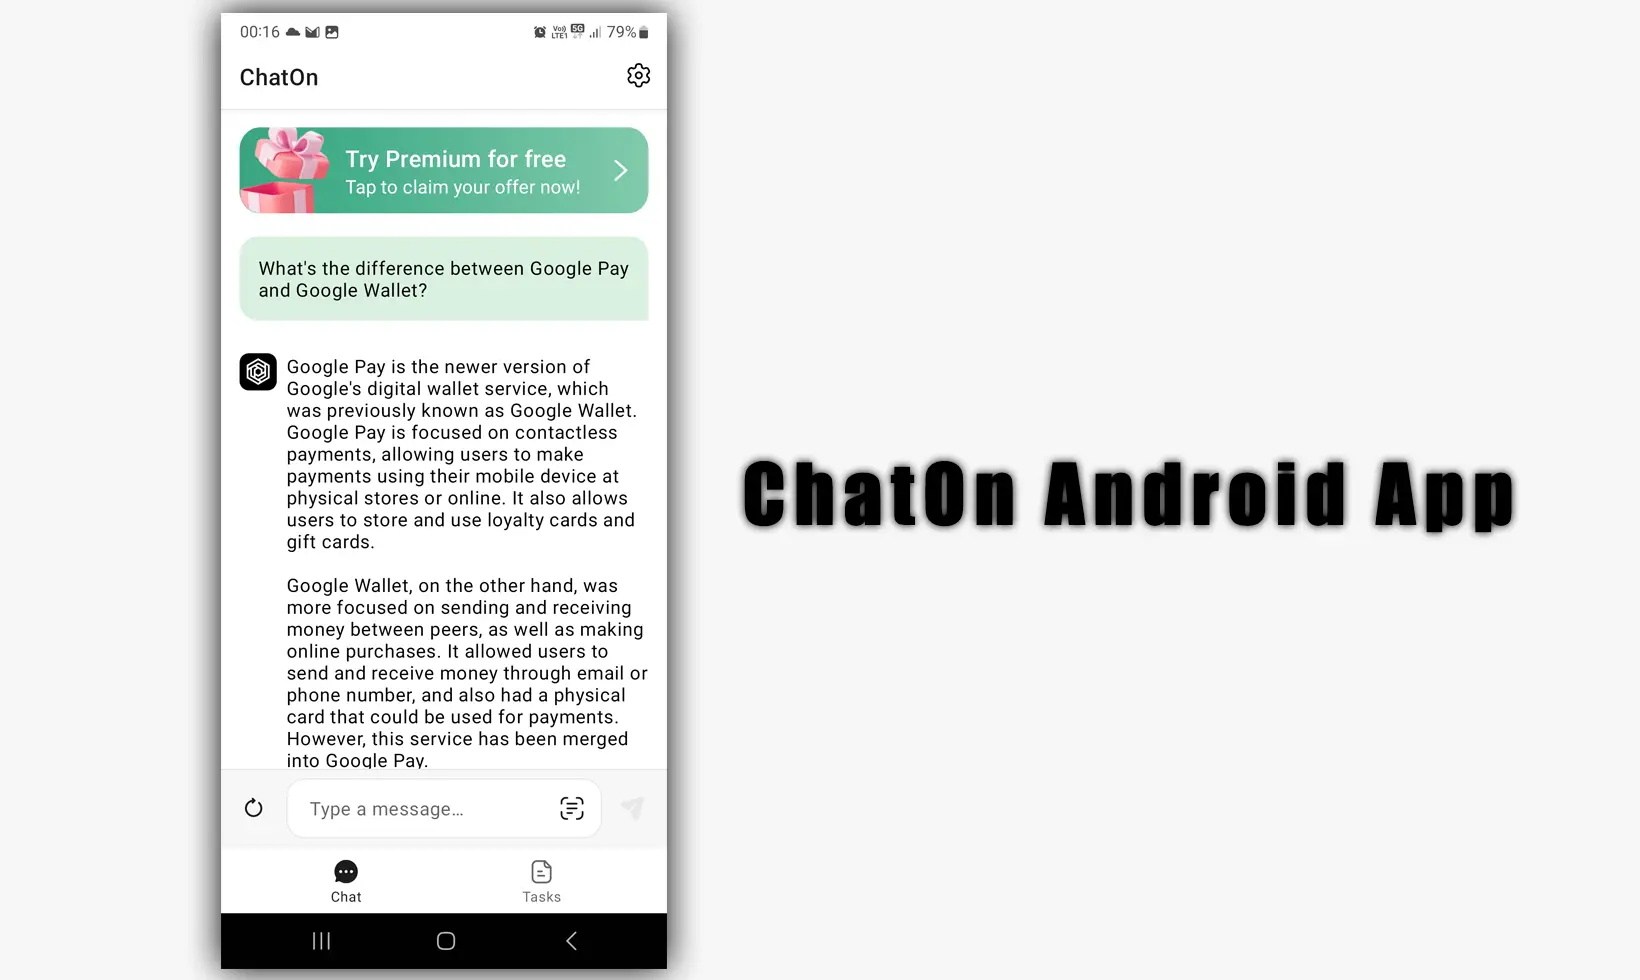 ChatOn Android App